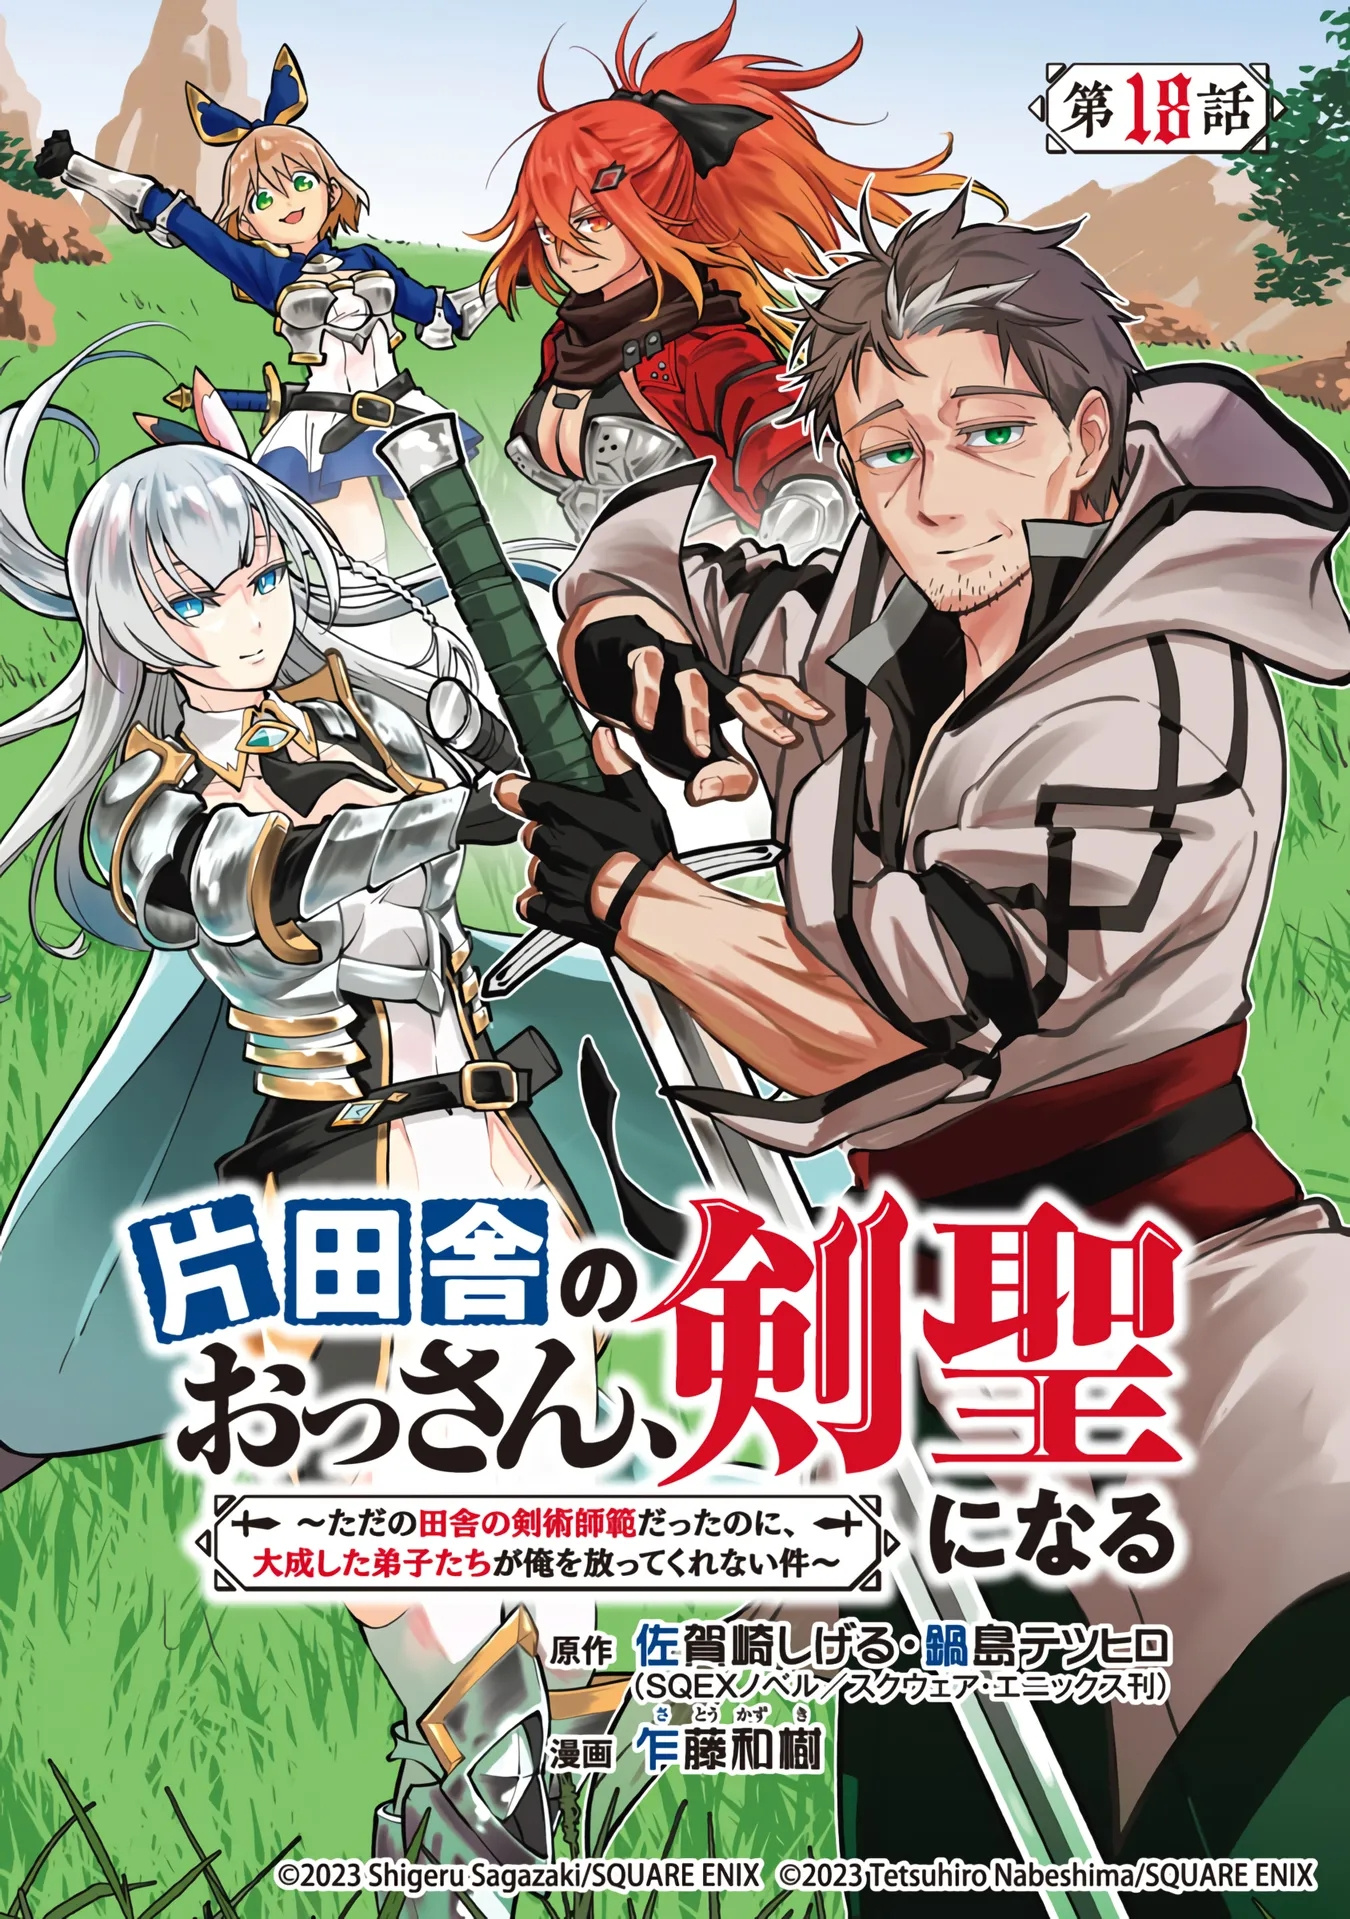 An Old Man From the Countryside Becomes a Swords Saint: I Was Just a Rural Sword Teacher, but My Successful Students Won't Leave Me Alone! Vol.4 Chapter 18: Old Man Became The Topic Of Rumours!